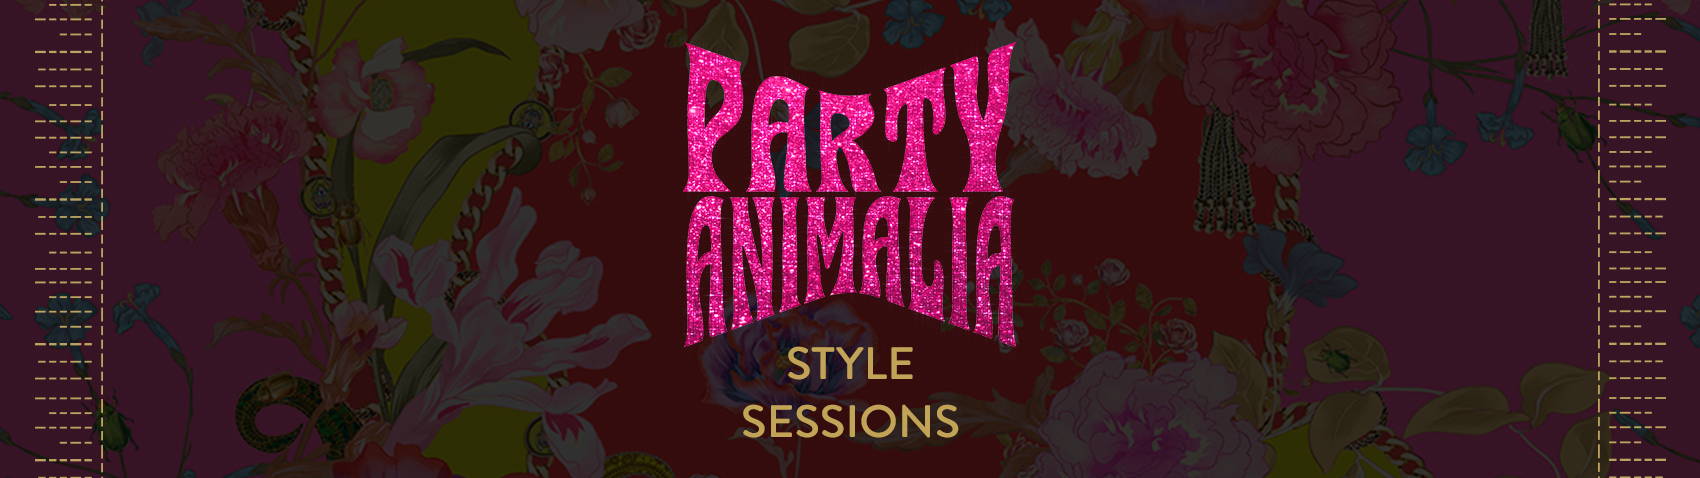 PARTY ANIMALIA STYLE SESSIONS